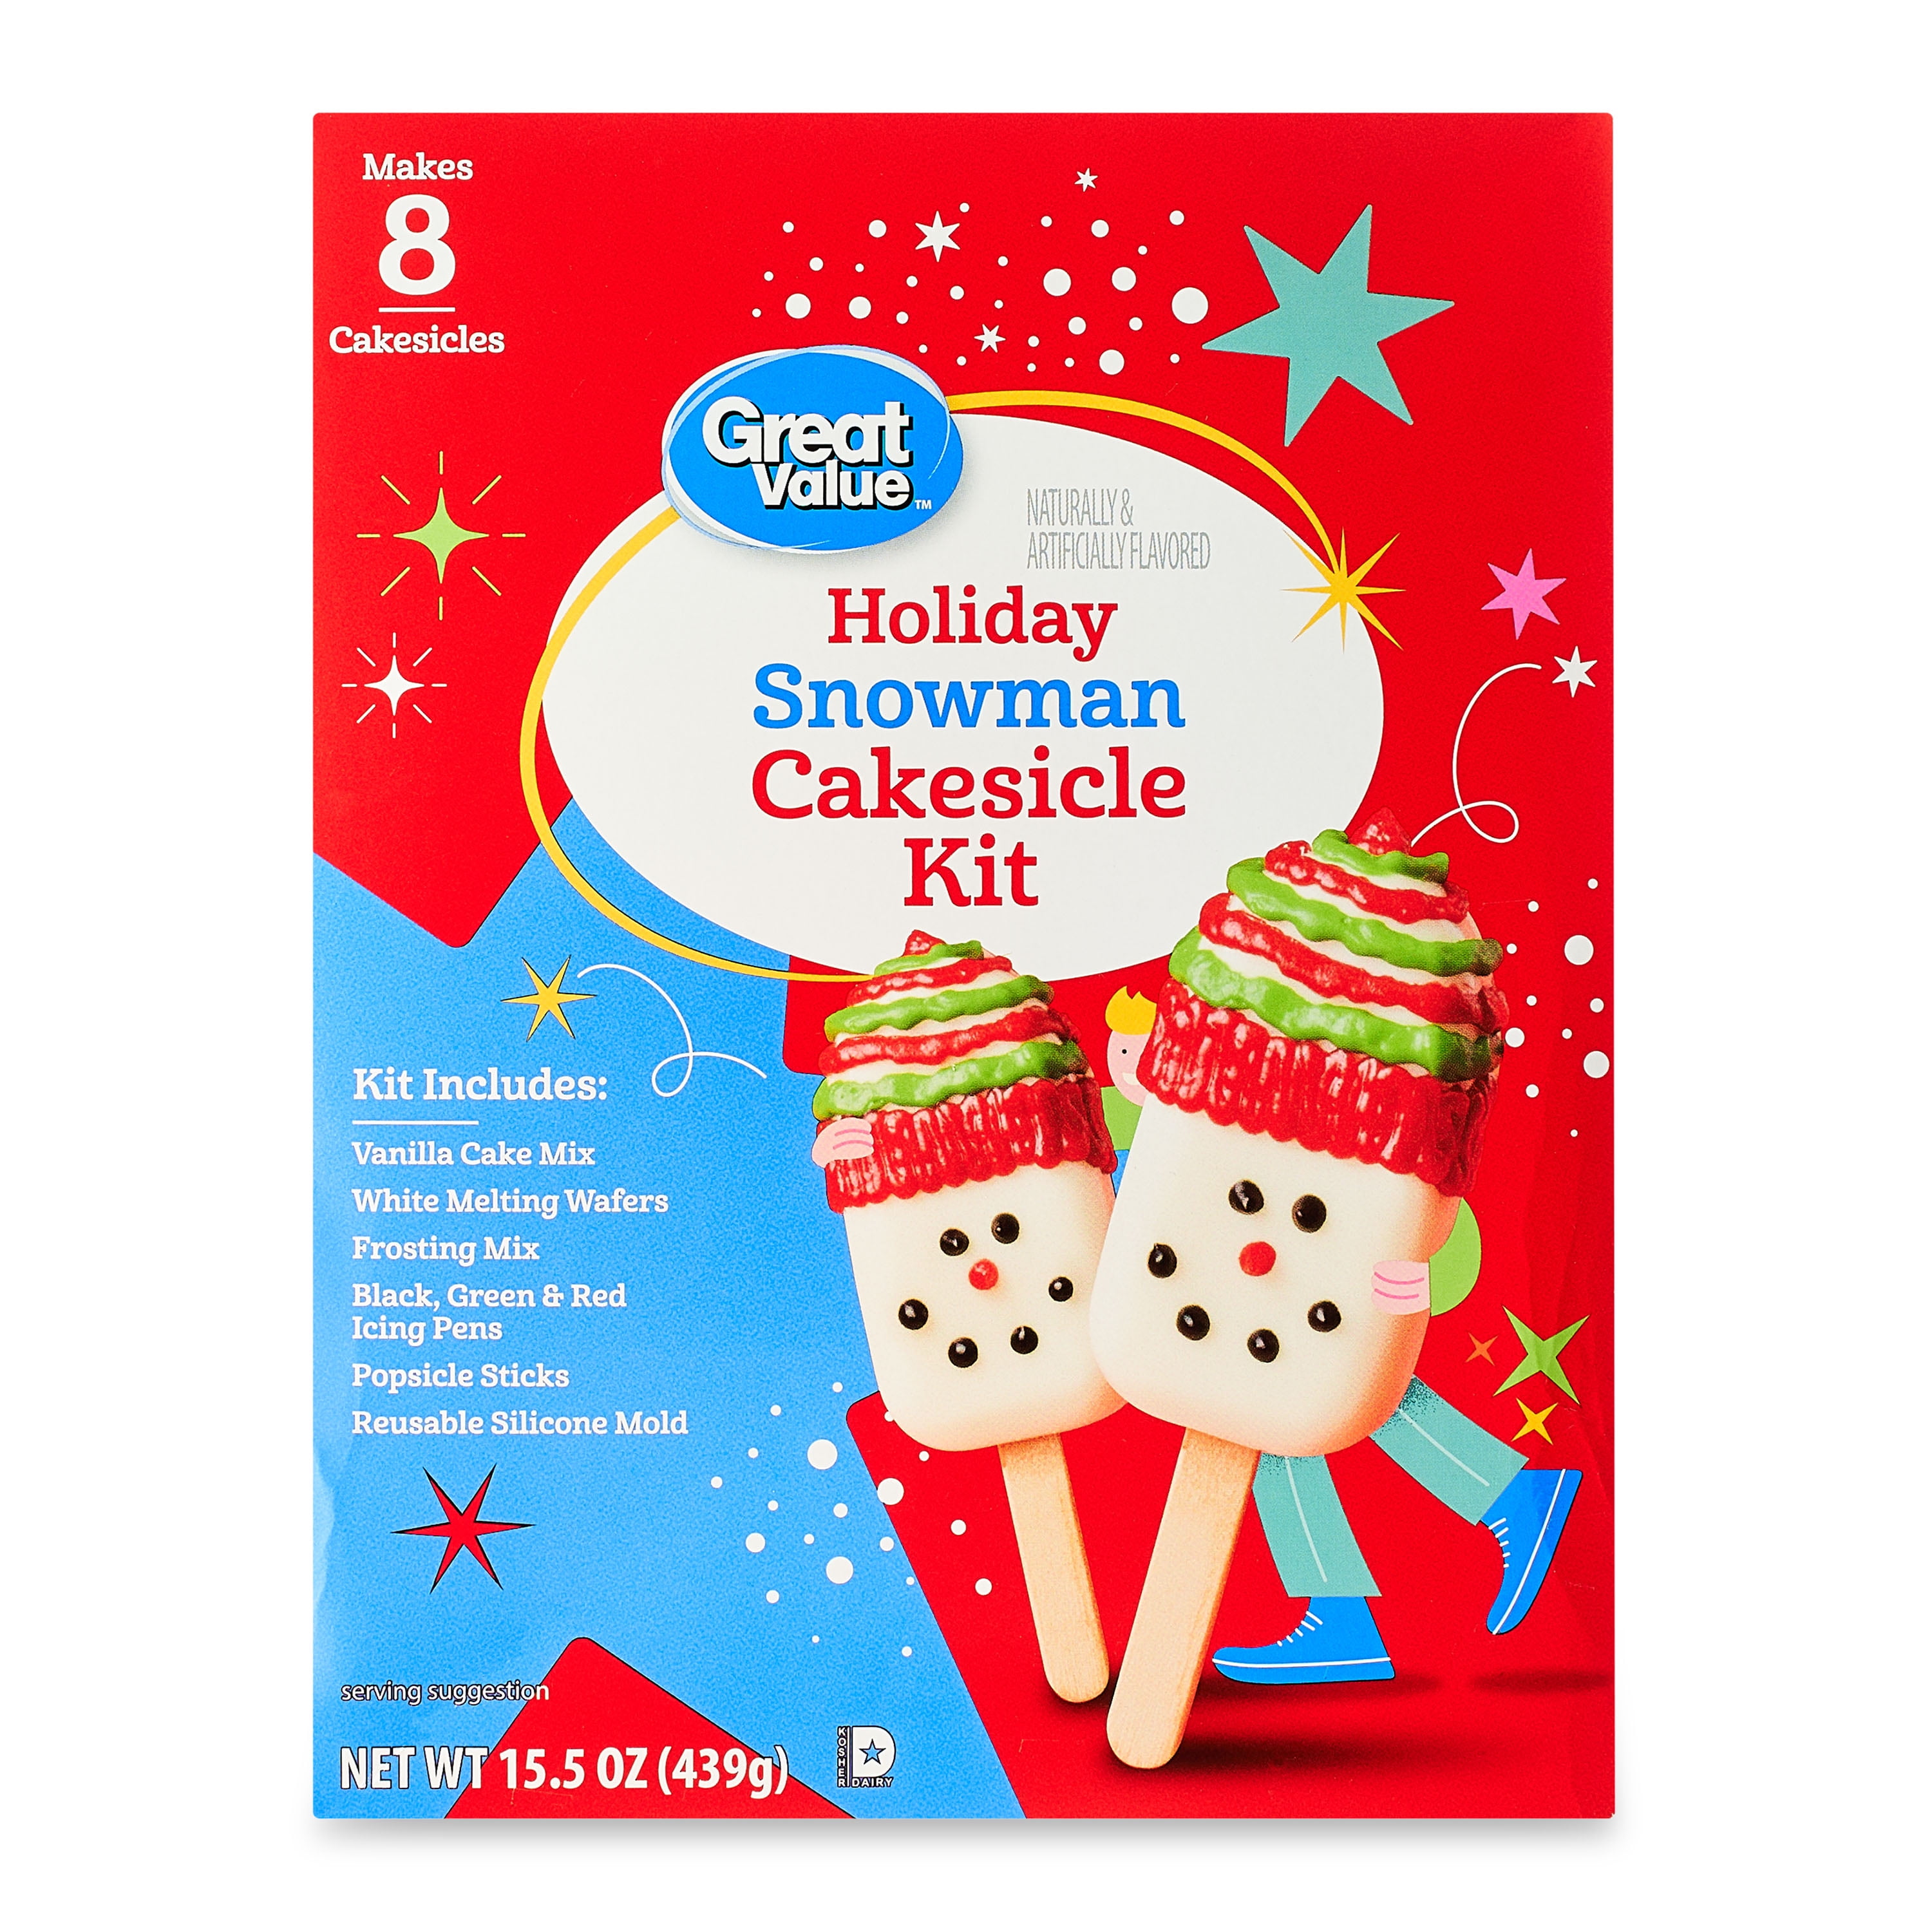 Great Value Holiday Snowman Cakesicle Kit